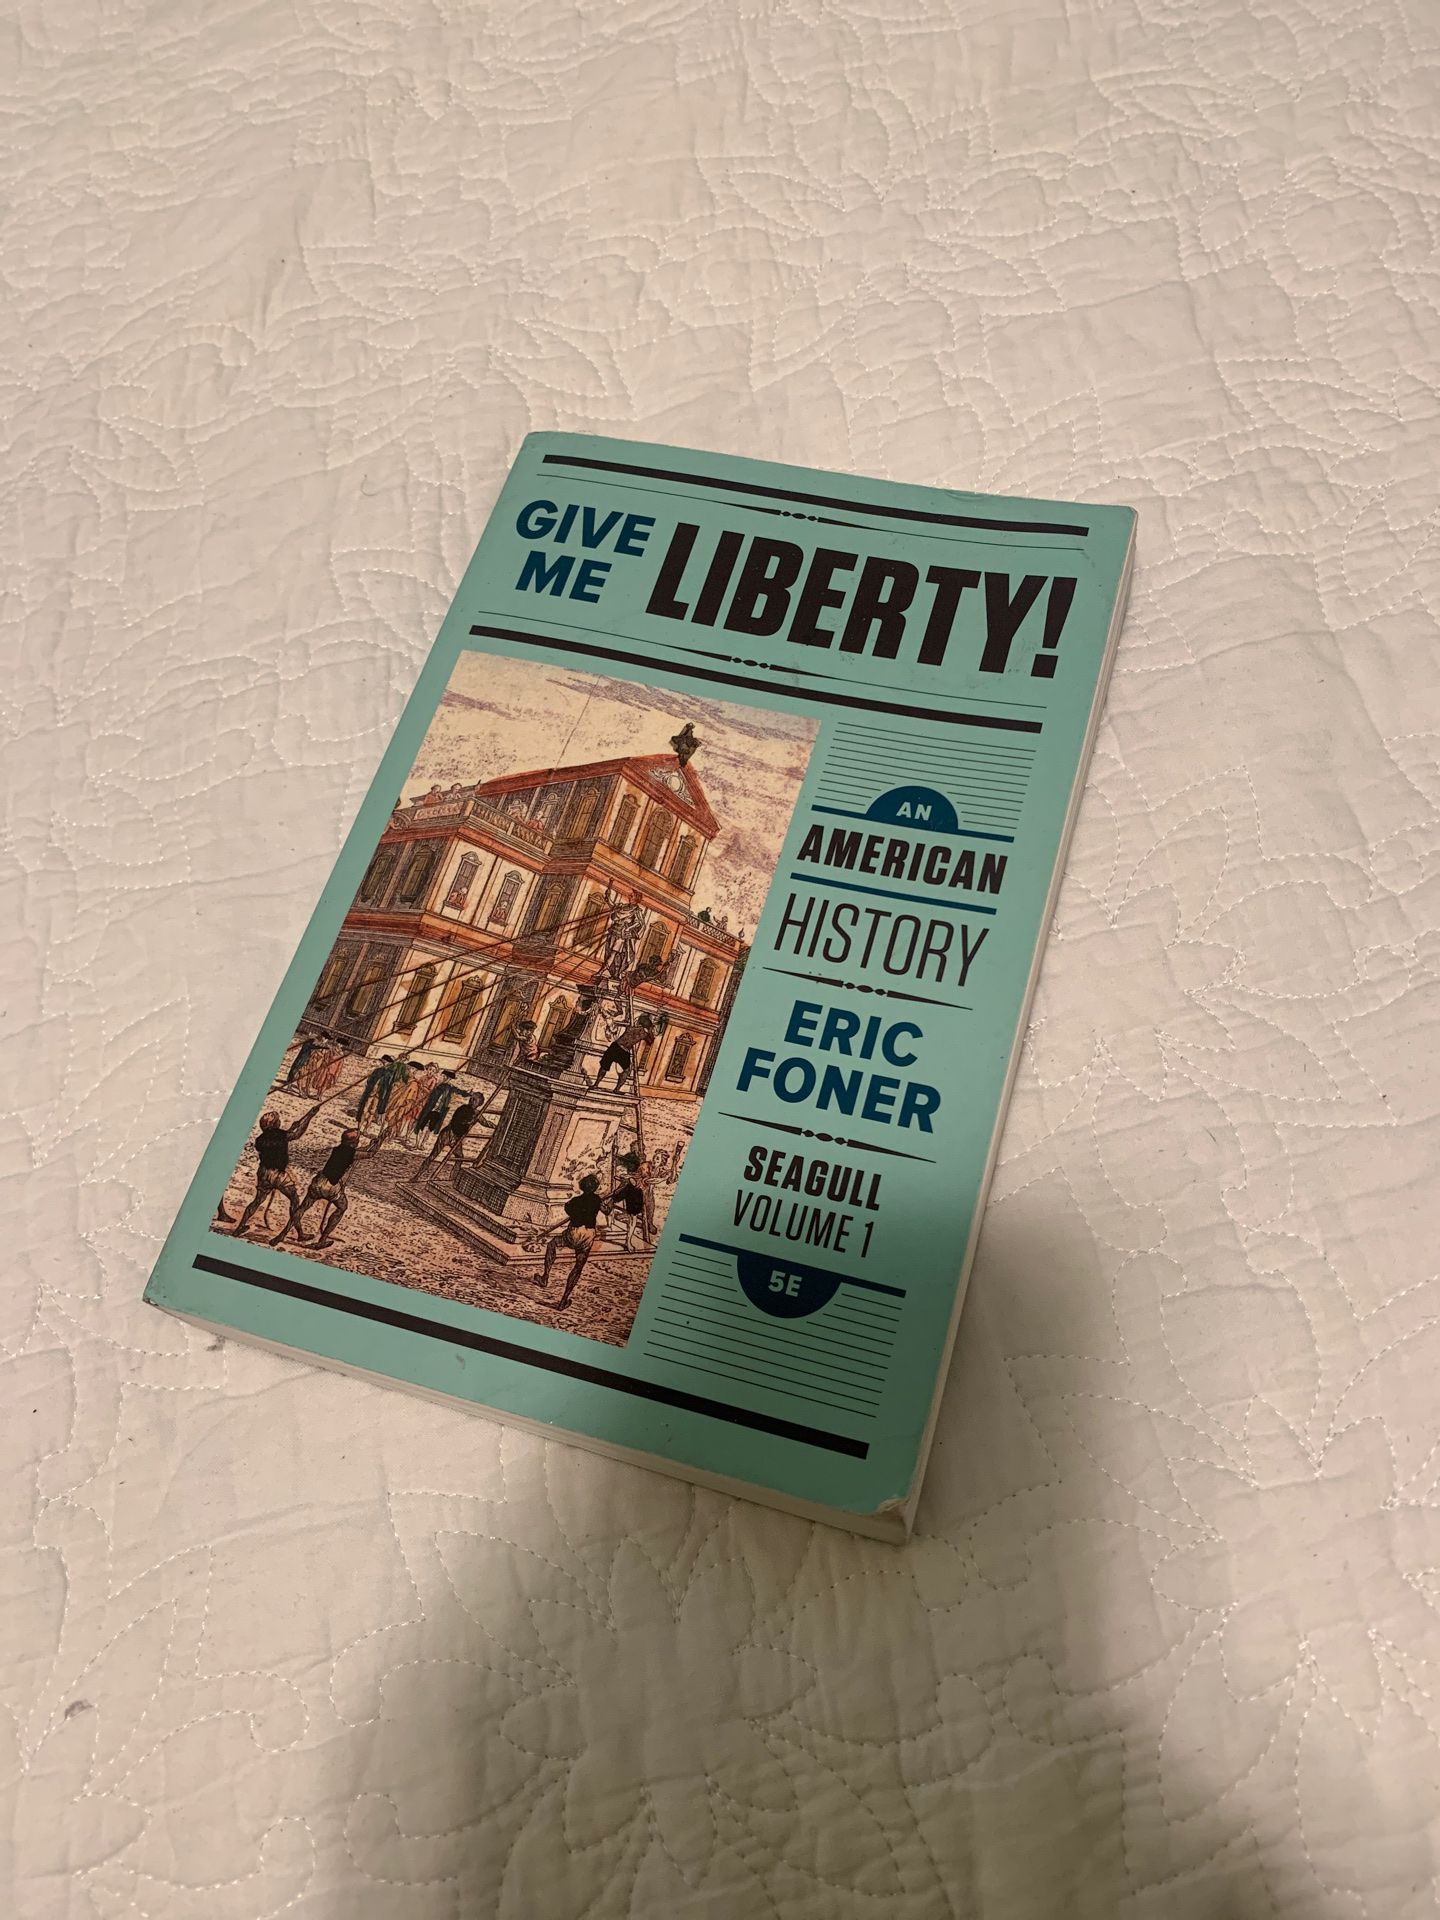 Give me liberty! By Eric Foner